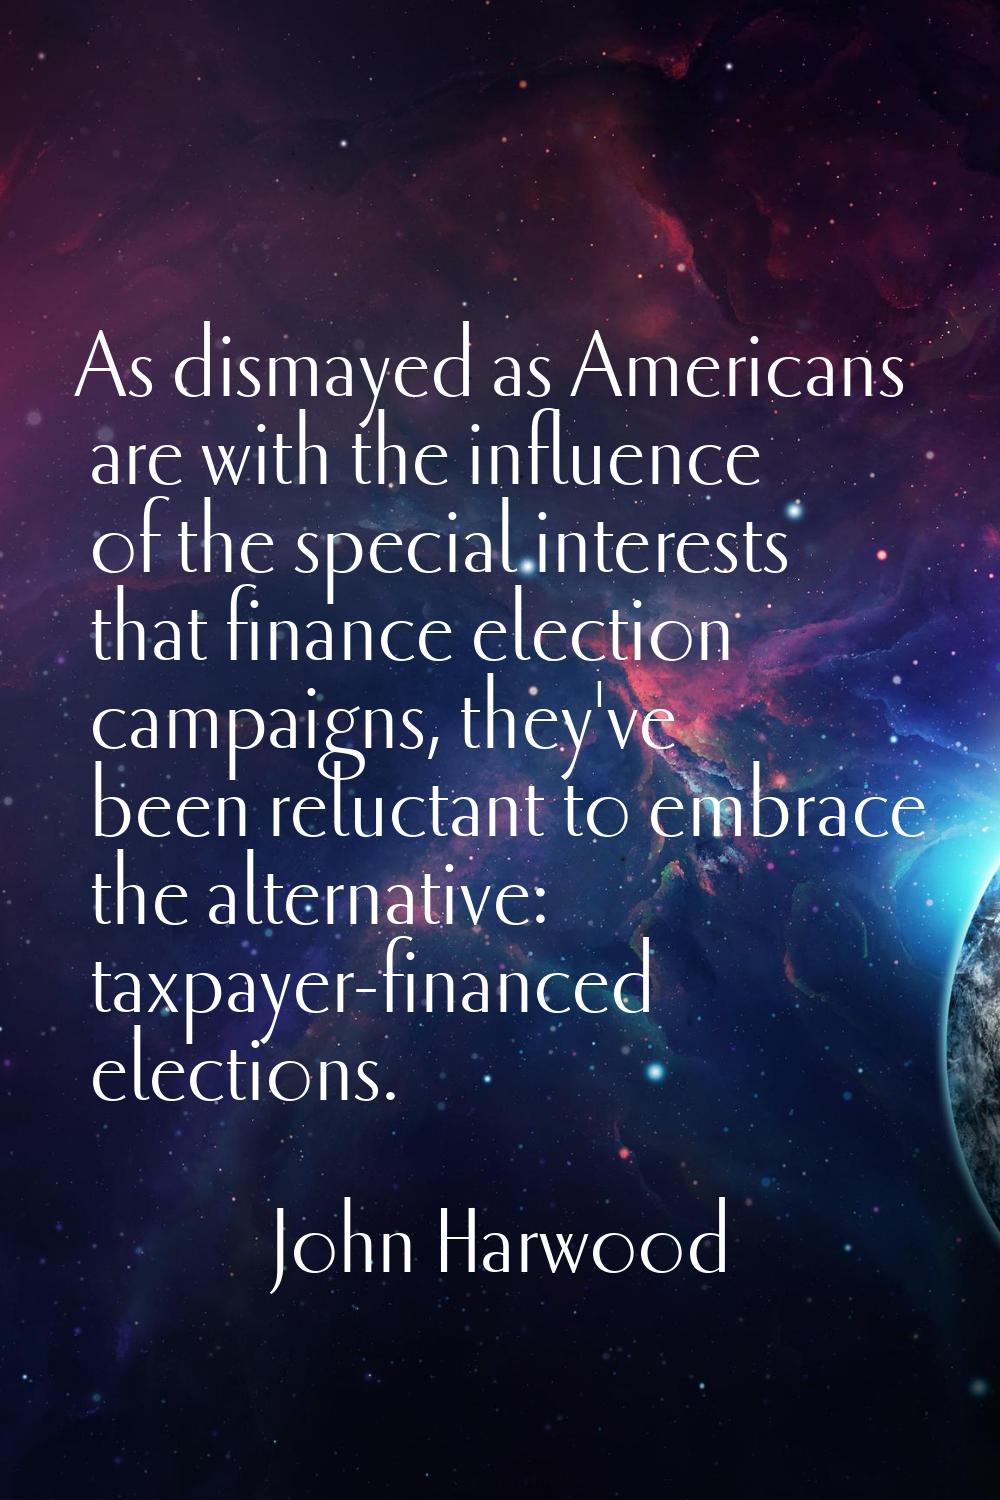 As dismayed as Americans are with the influence of the special interests that finance election camp